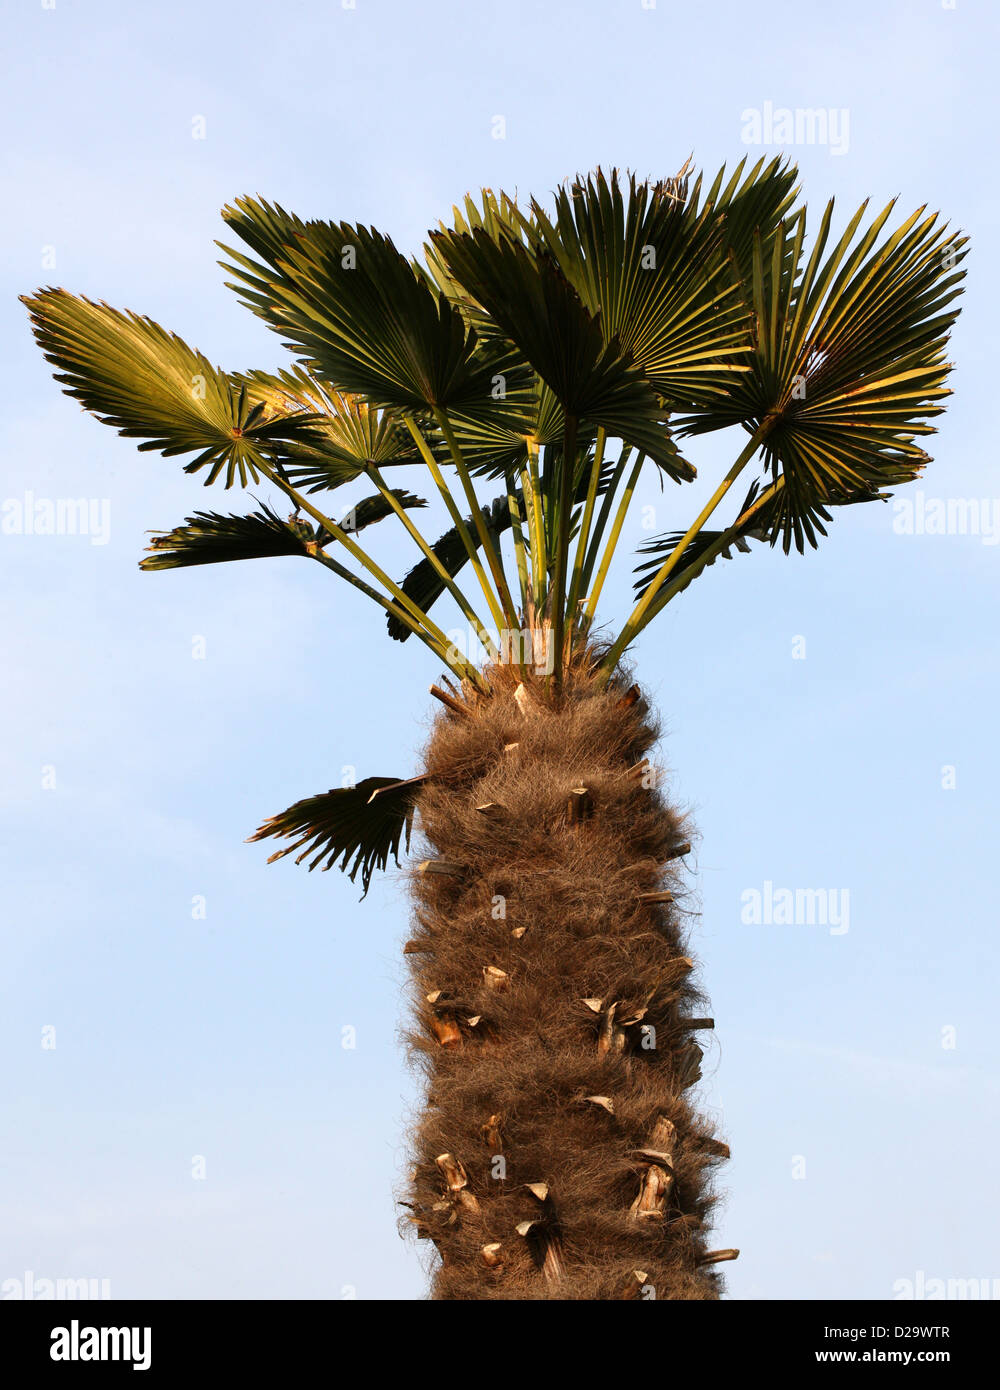 Chusan Palm, Trachycarpus fortunei f. wagnerianus, Arecaceae. Central and Southern China. Stock Photo